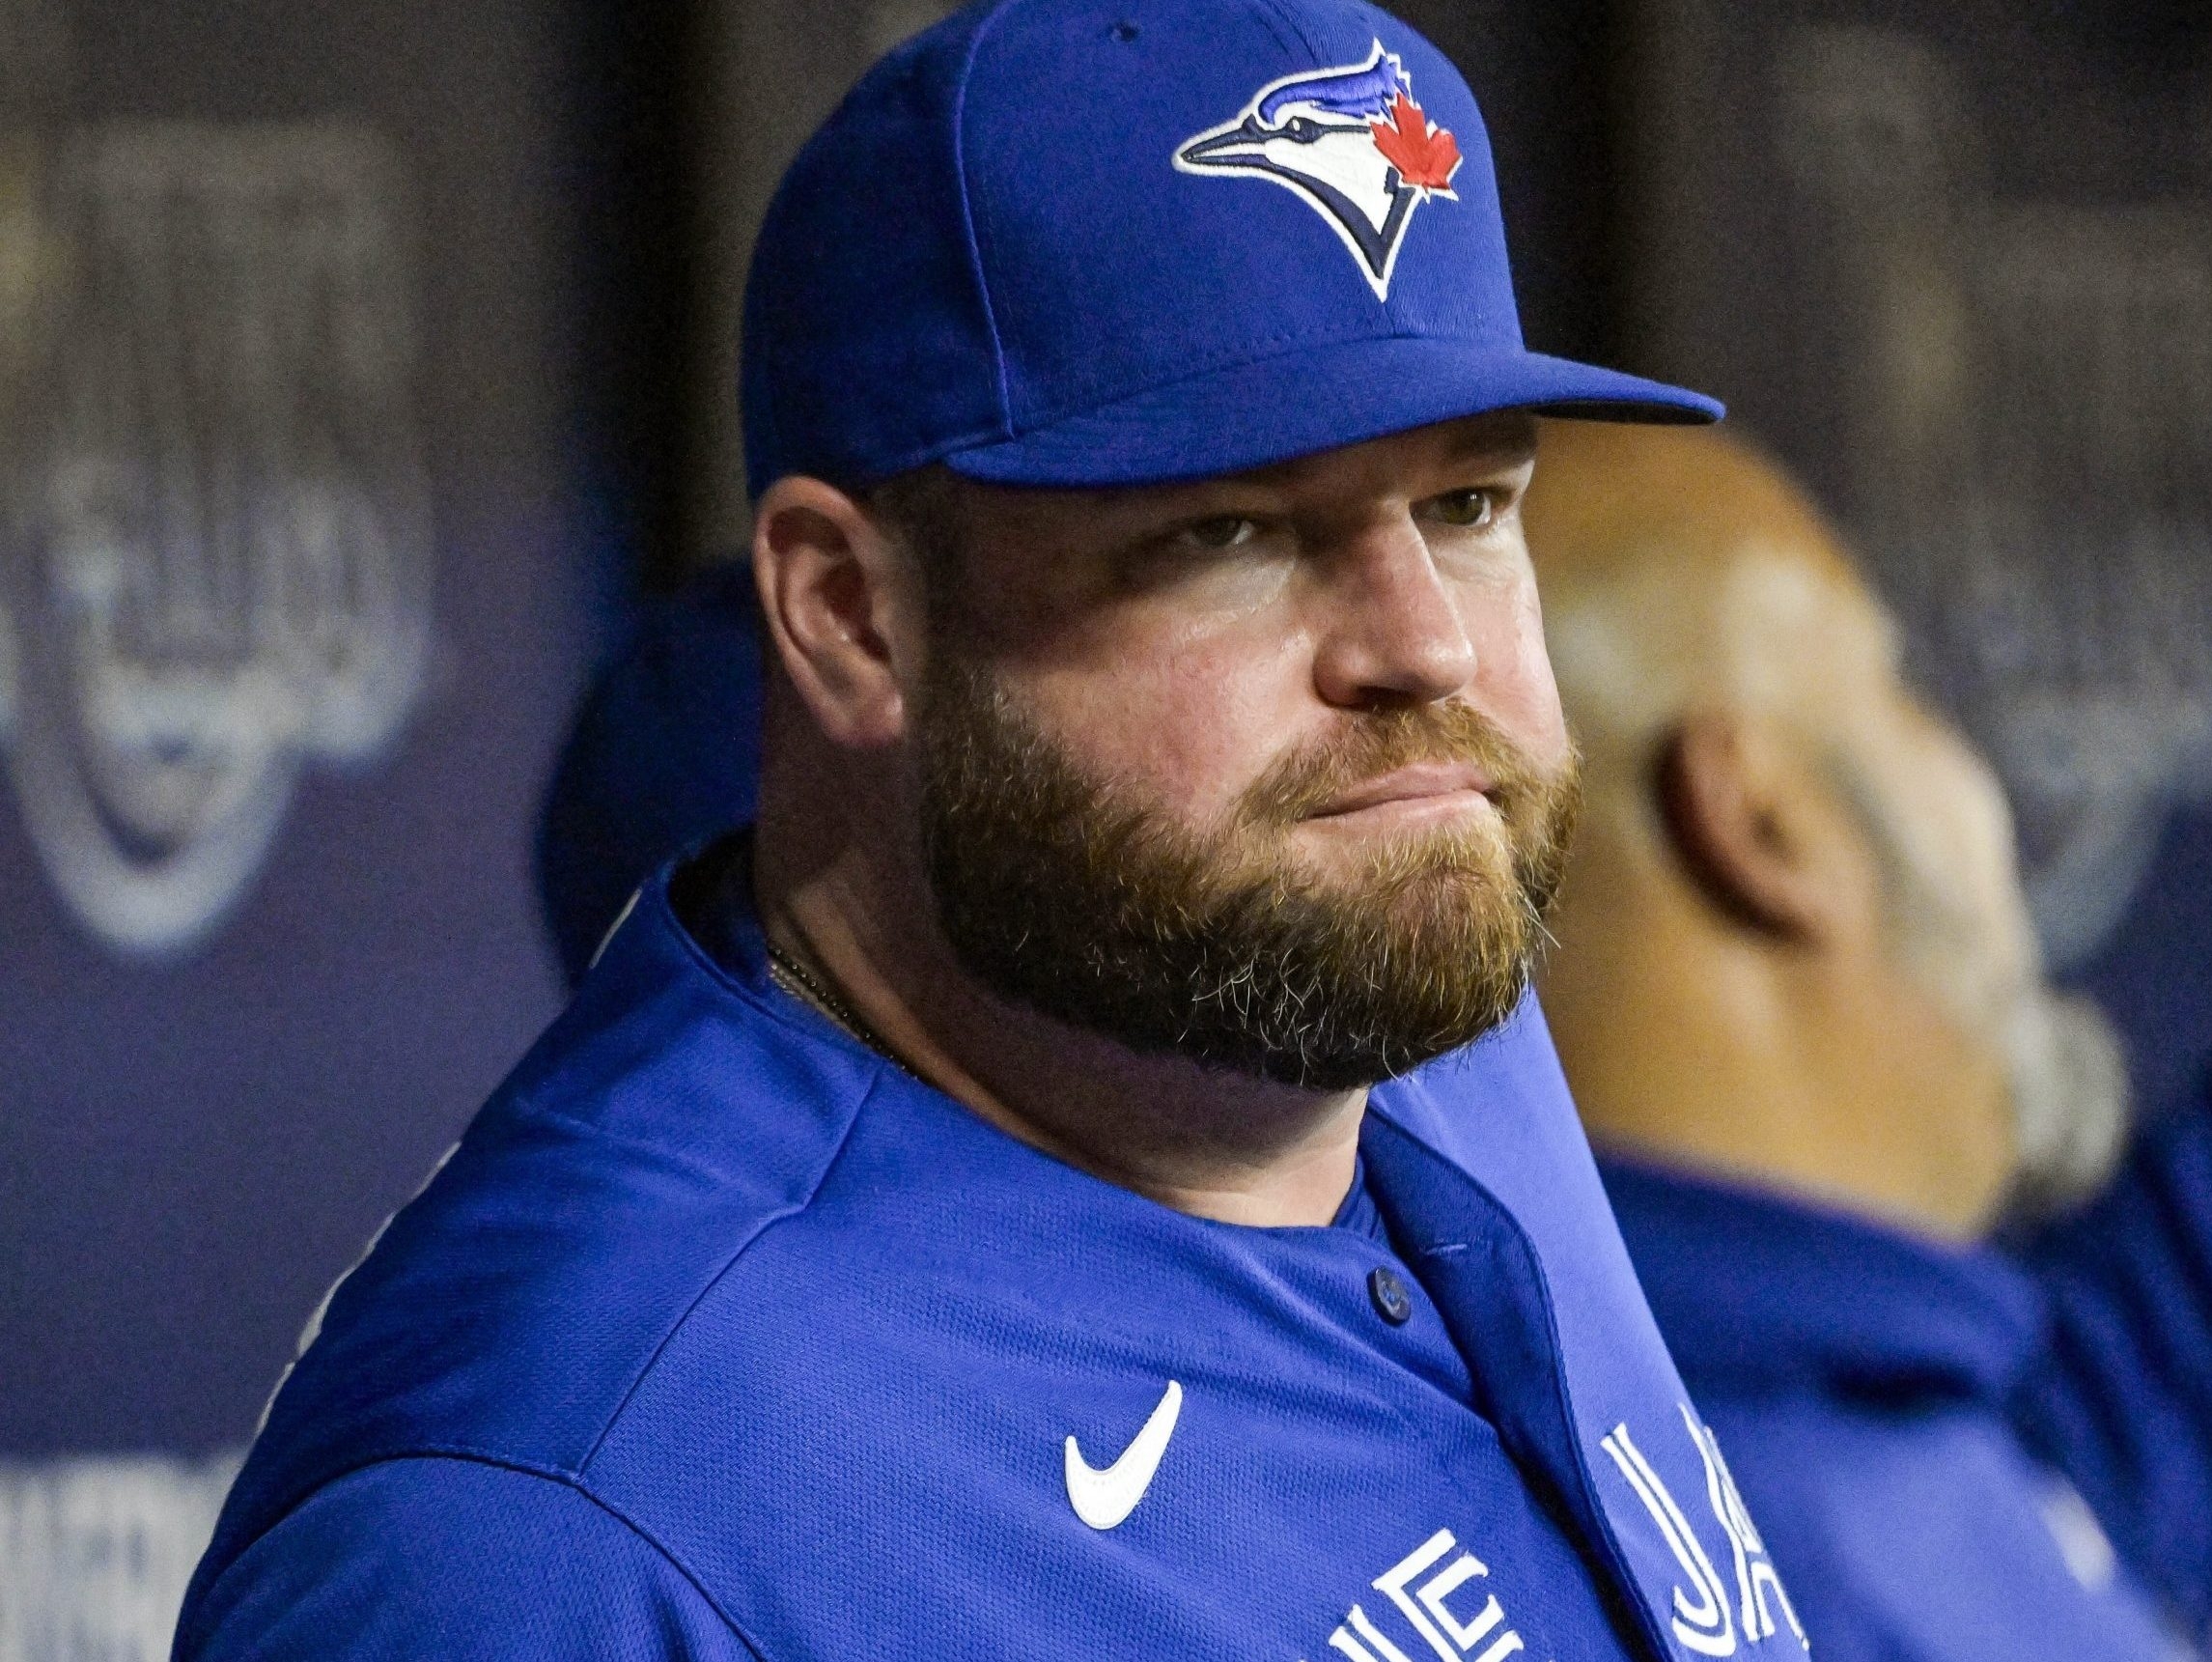 Blue Jays manager John Schneider on the hot seat? Don't be ridiculous